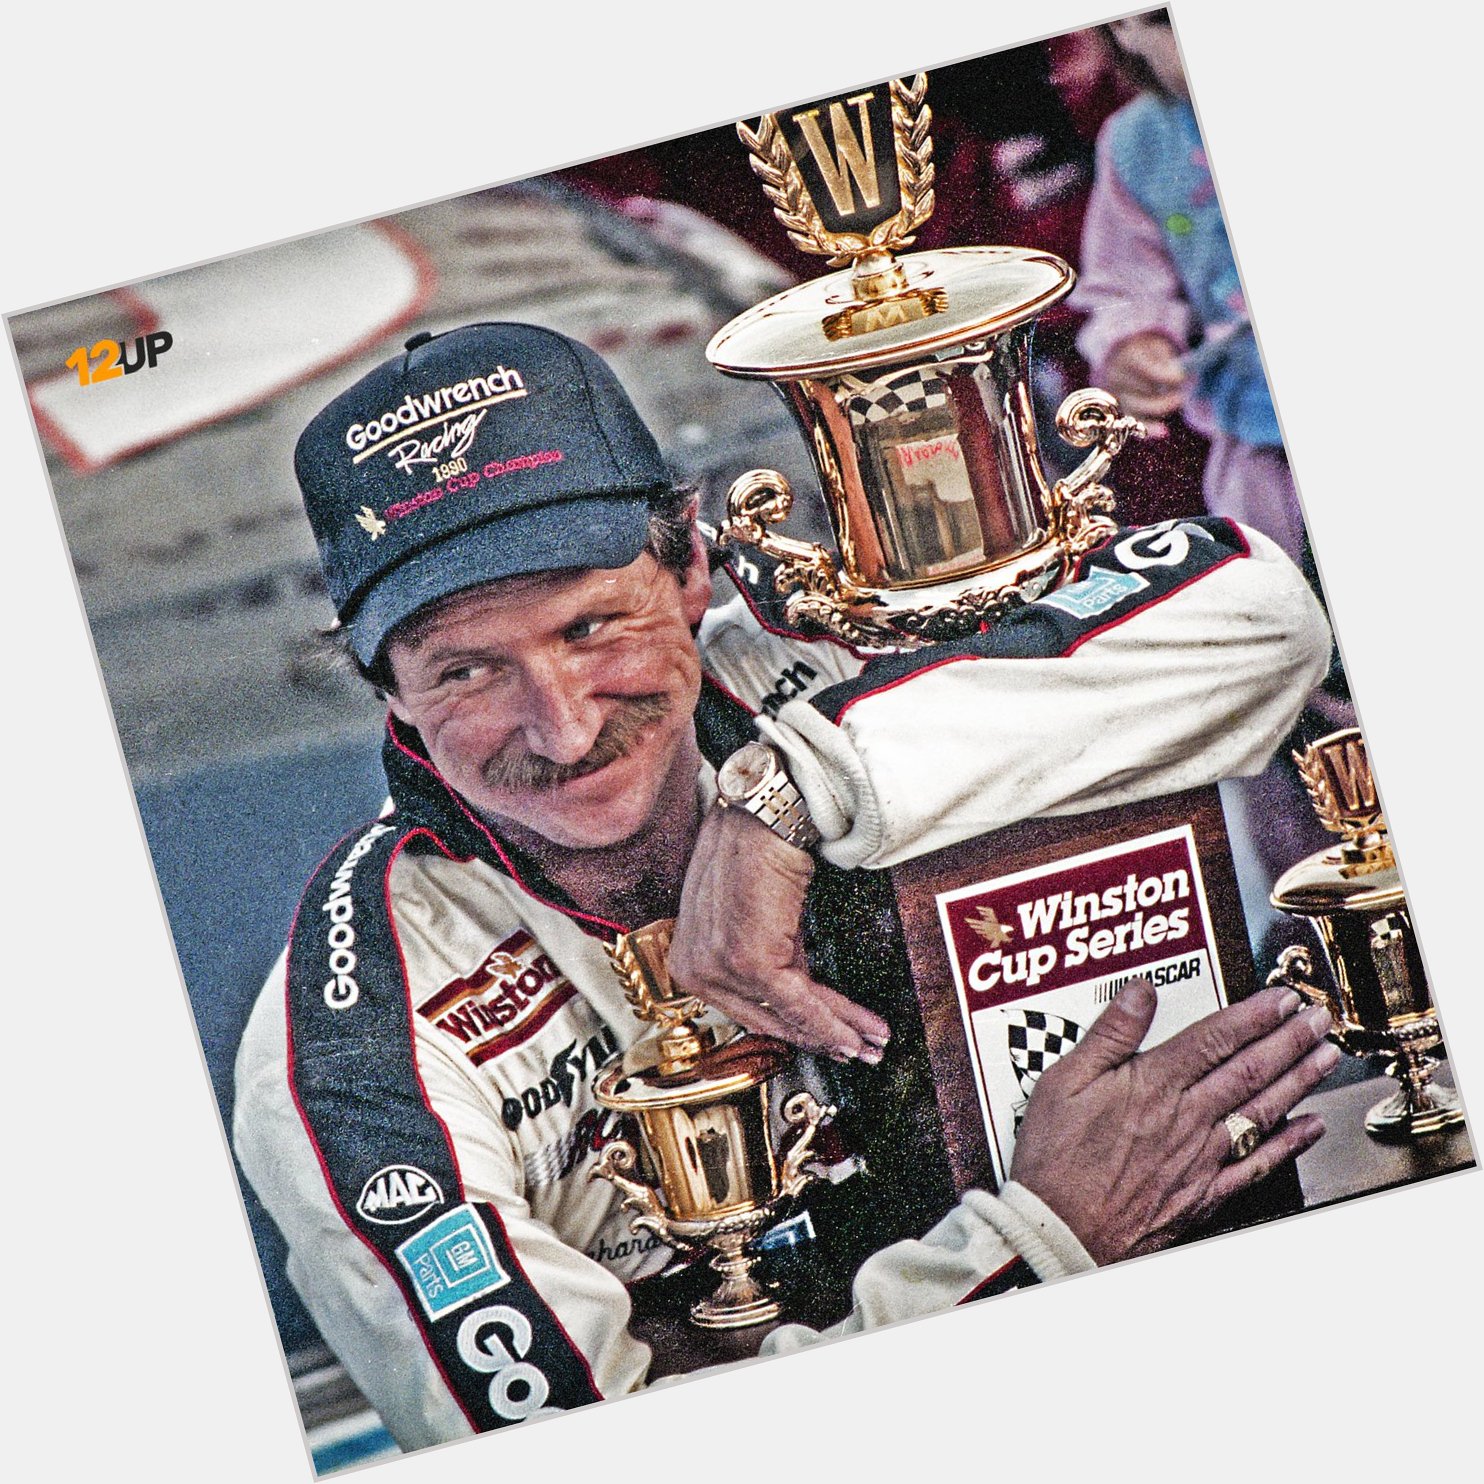 Happy birthday, Dale Earnhardt Sr. 

The racing legend would have turned 69 today. 